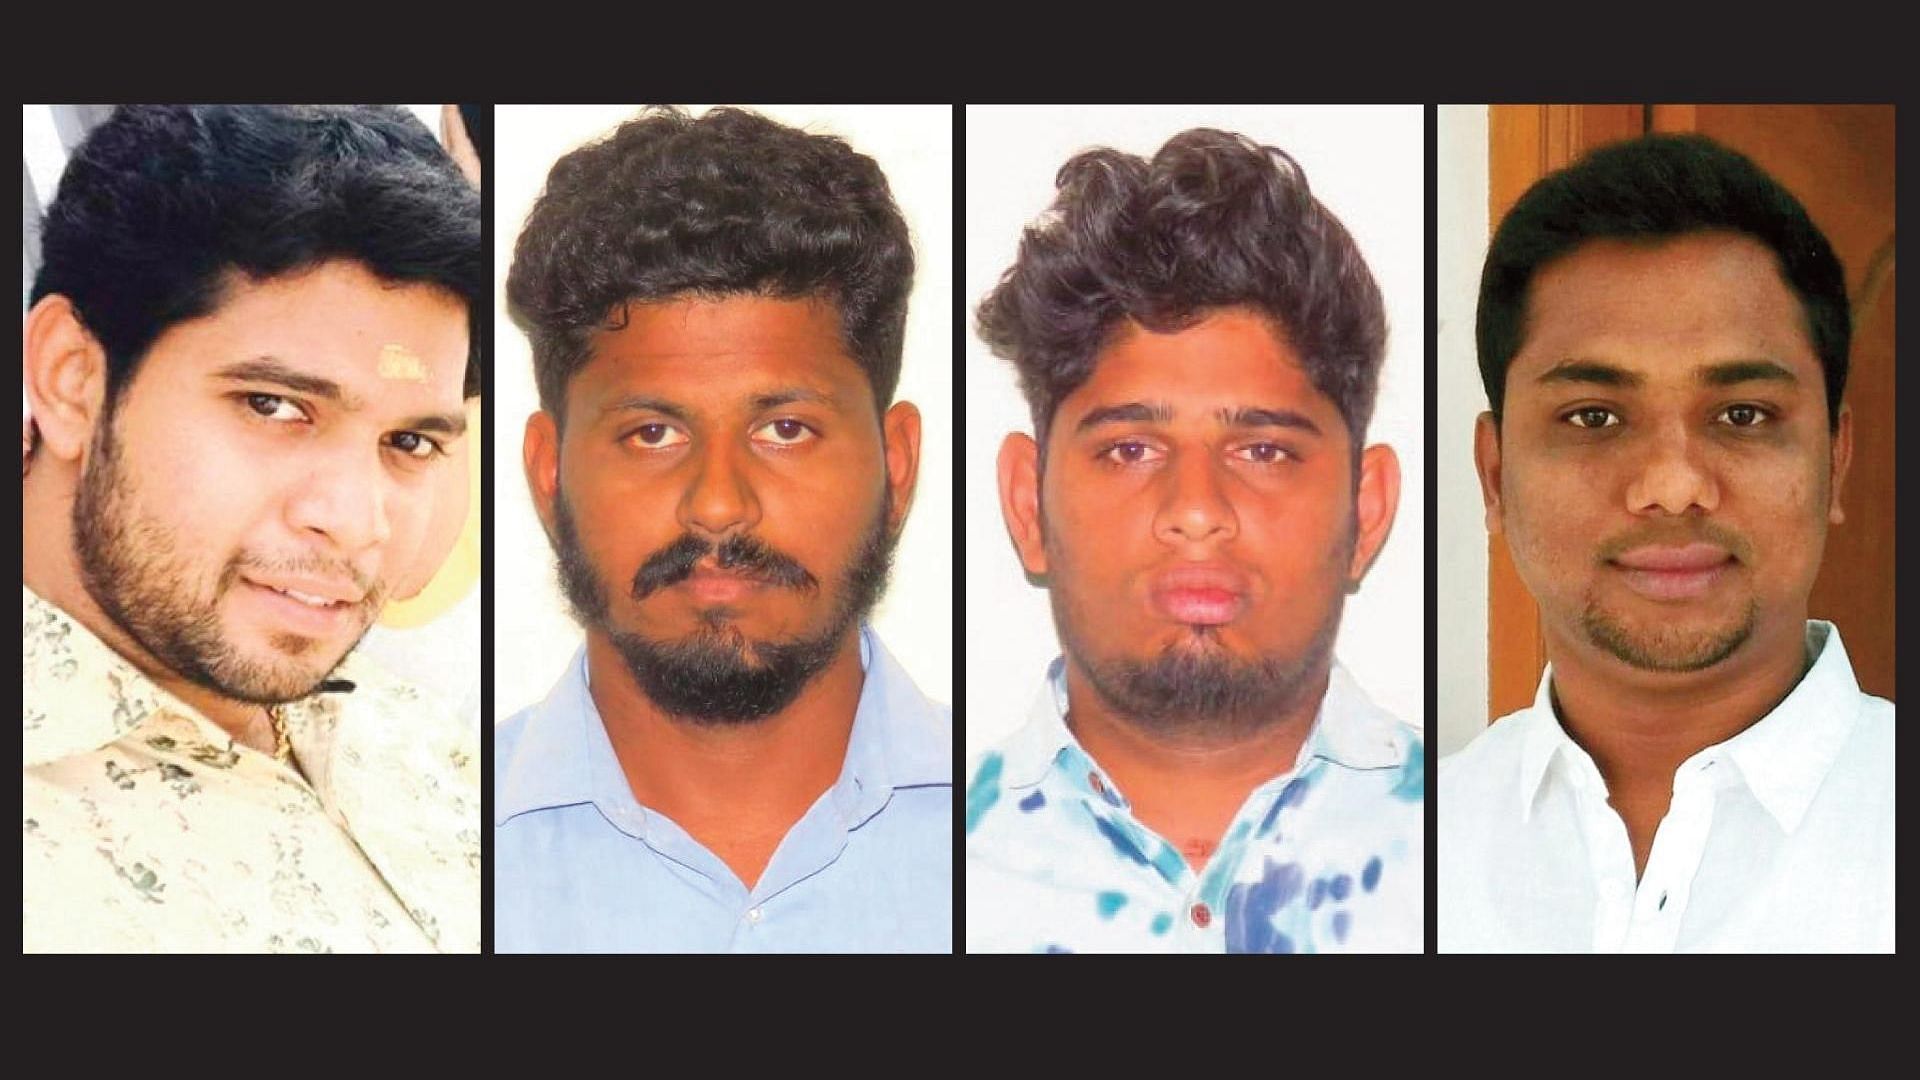 Thirunavukkarasu, Sabarirajan, Vasanthakumar and Satish - the four youths who were arrested in connection with the sexual assault of young girls in Pollachi, Tamil Nadu.